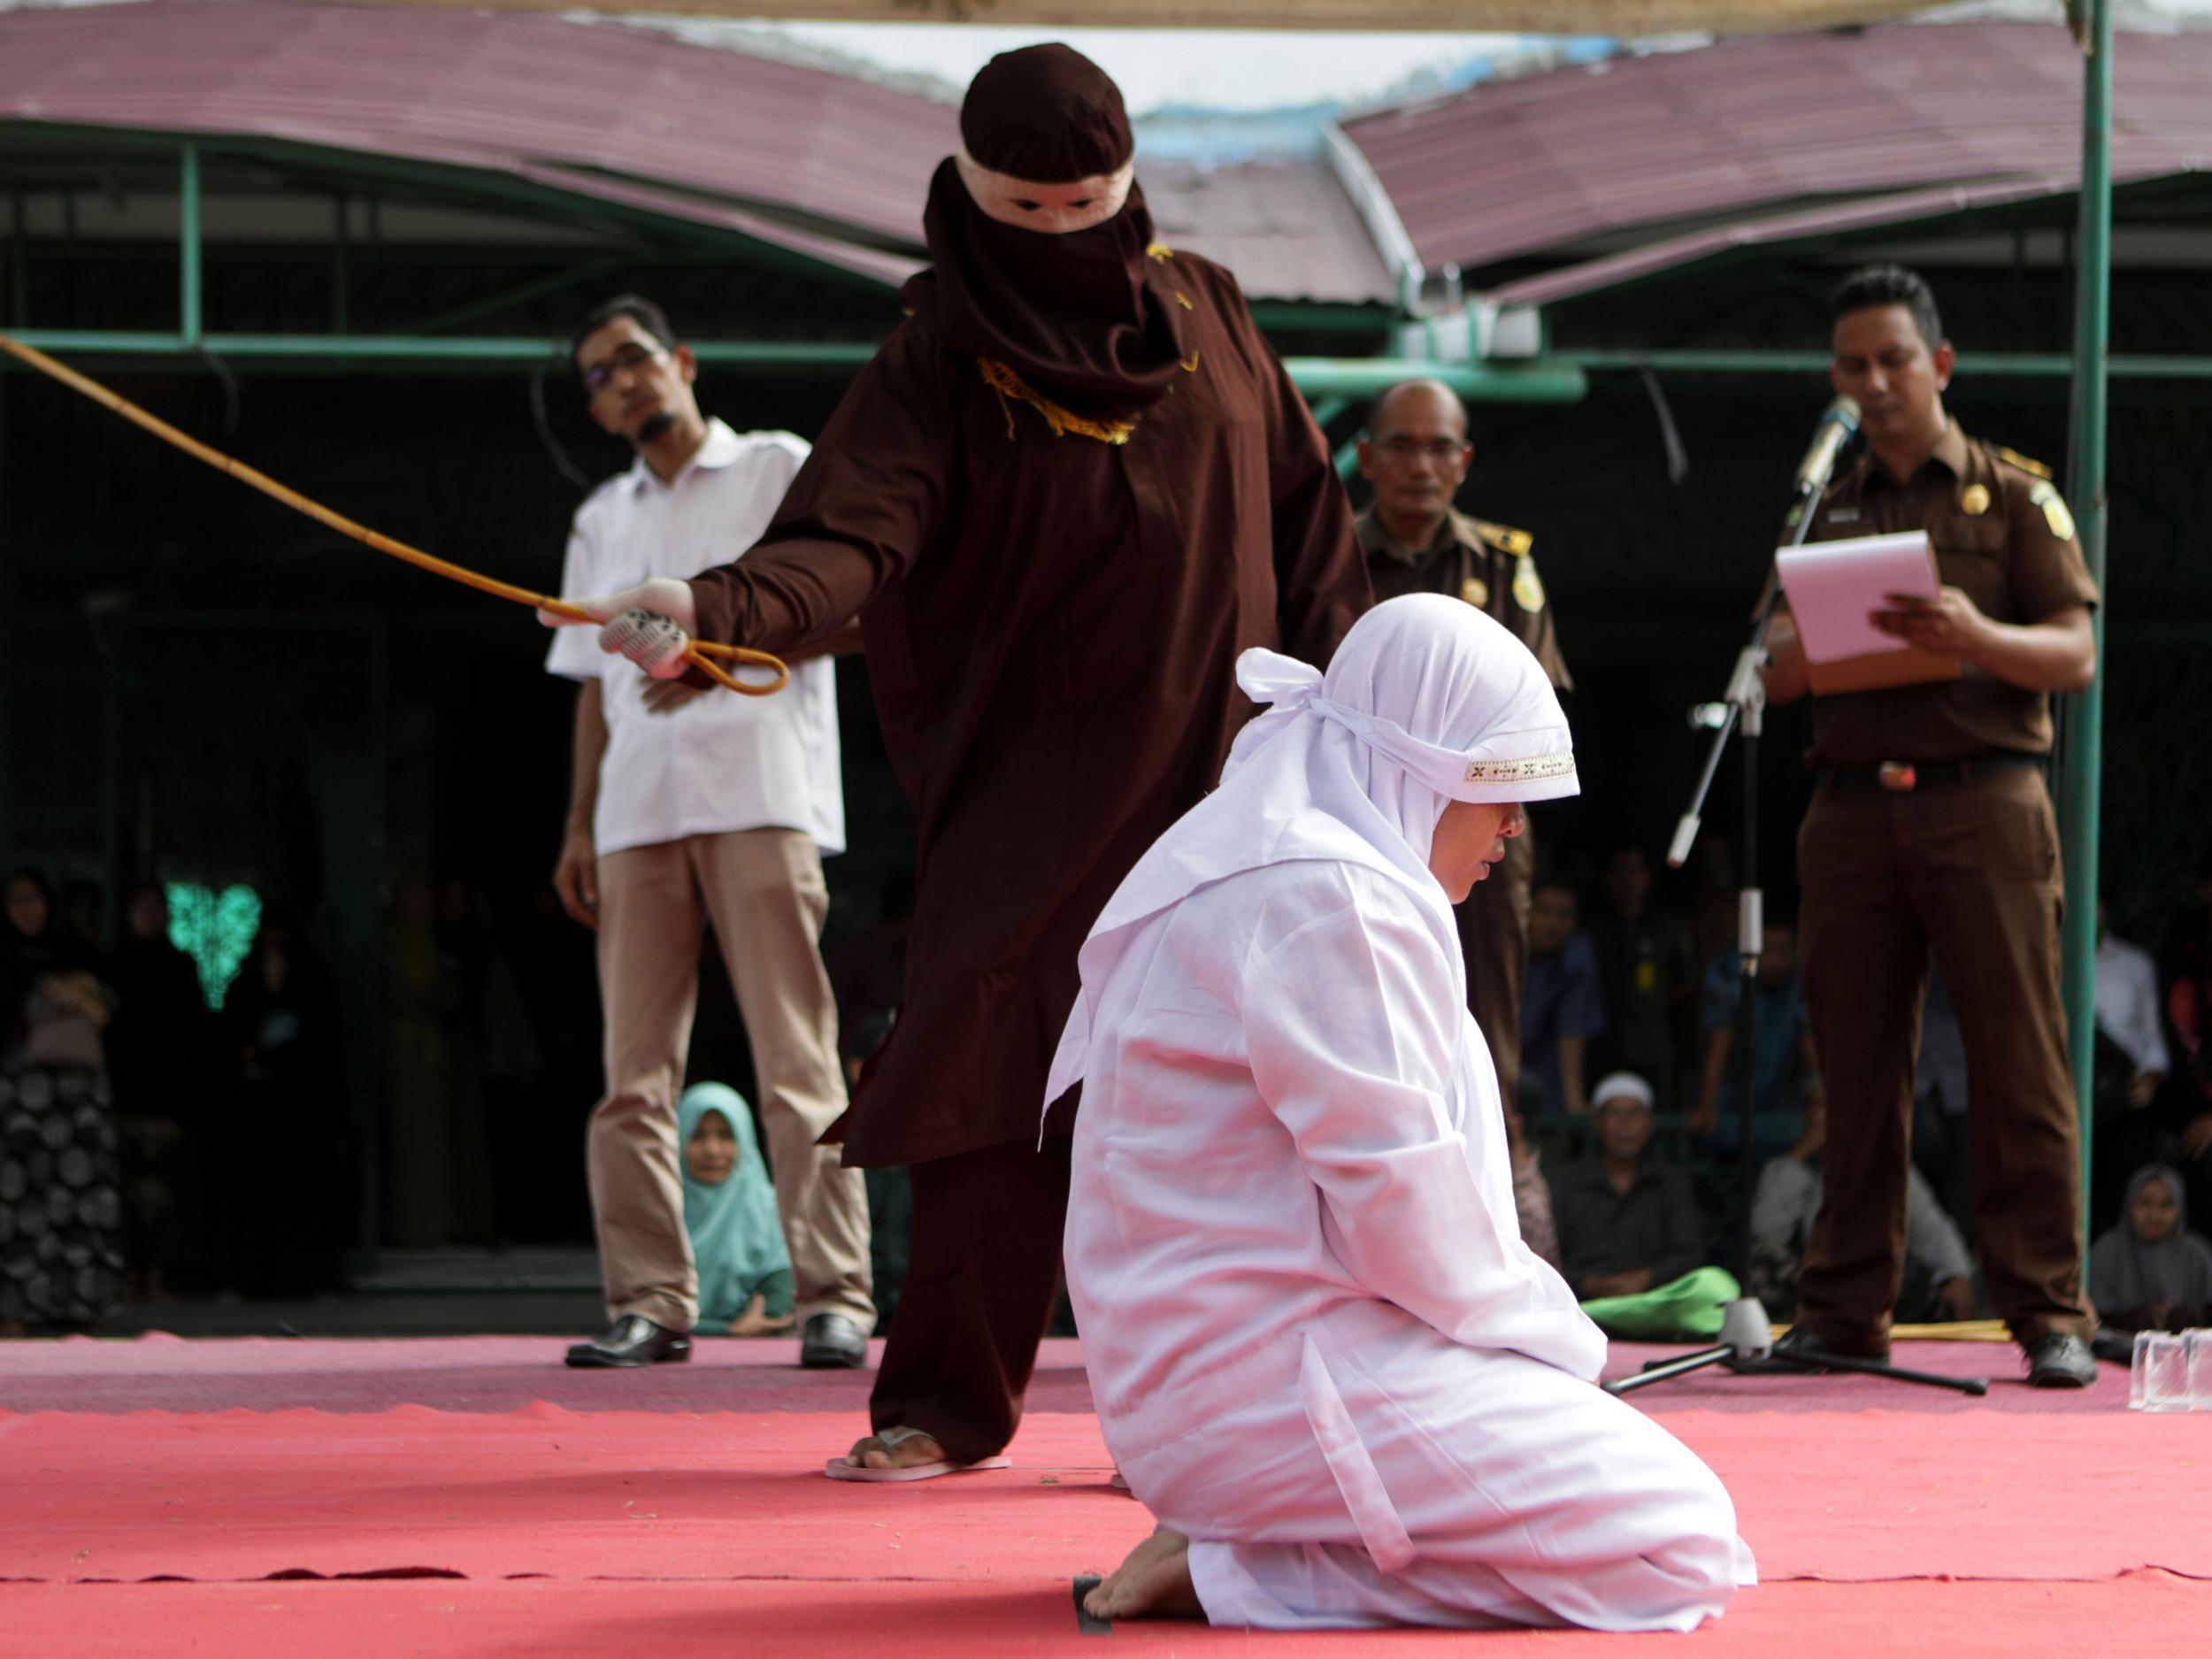 Indonesian woman lashed 100 times for being in presence of man she was not married to The Independent The Independent